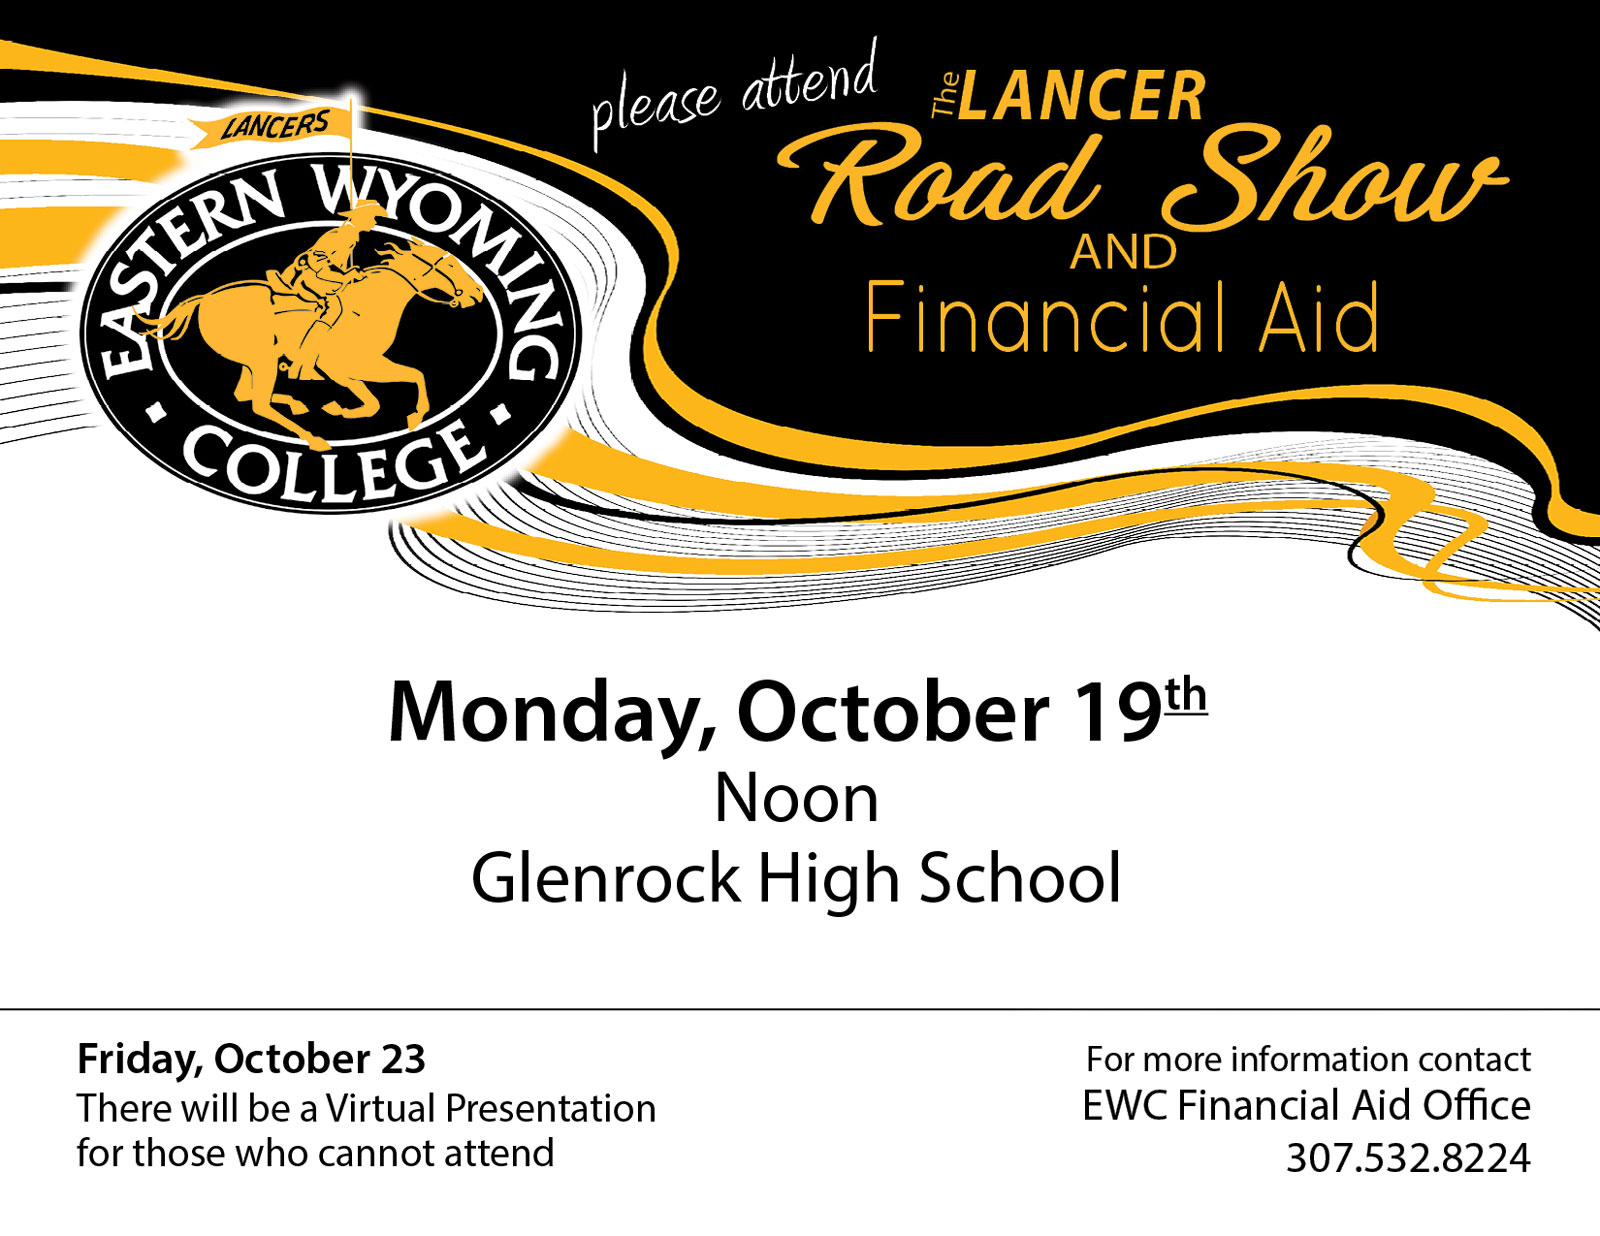 Lancer Rodeo Show and Financial Aid - October 19th - Glenrock High School - October 19th - Noon